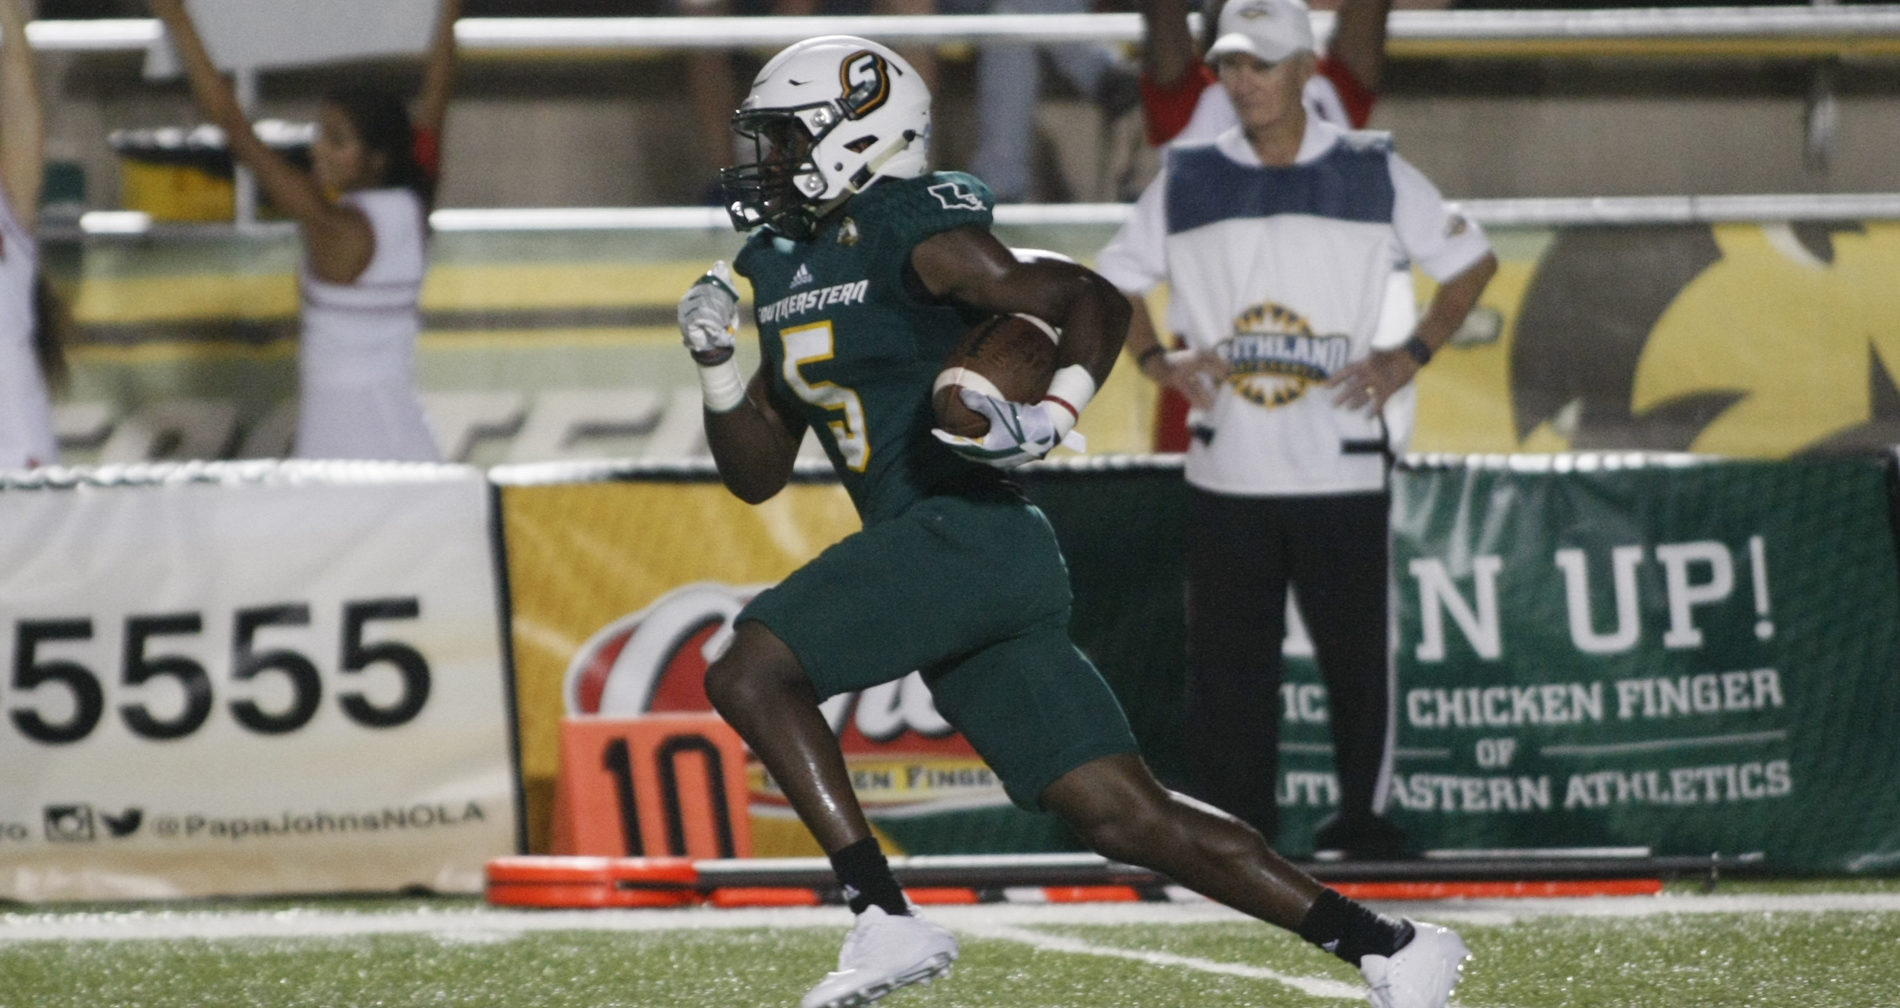 Southeastern Rolls to First Win over Lamar